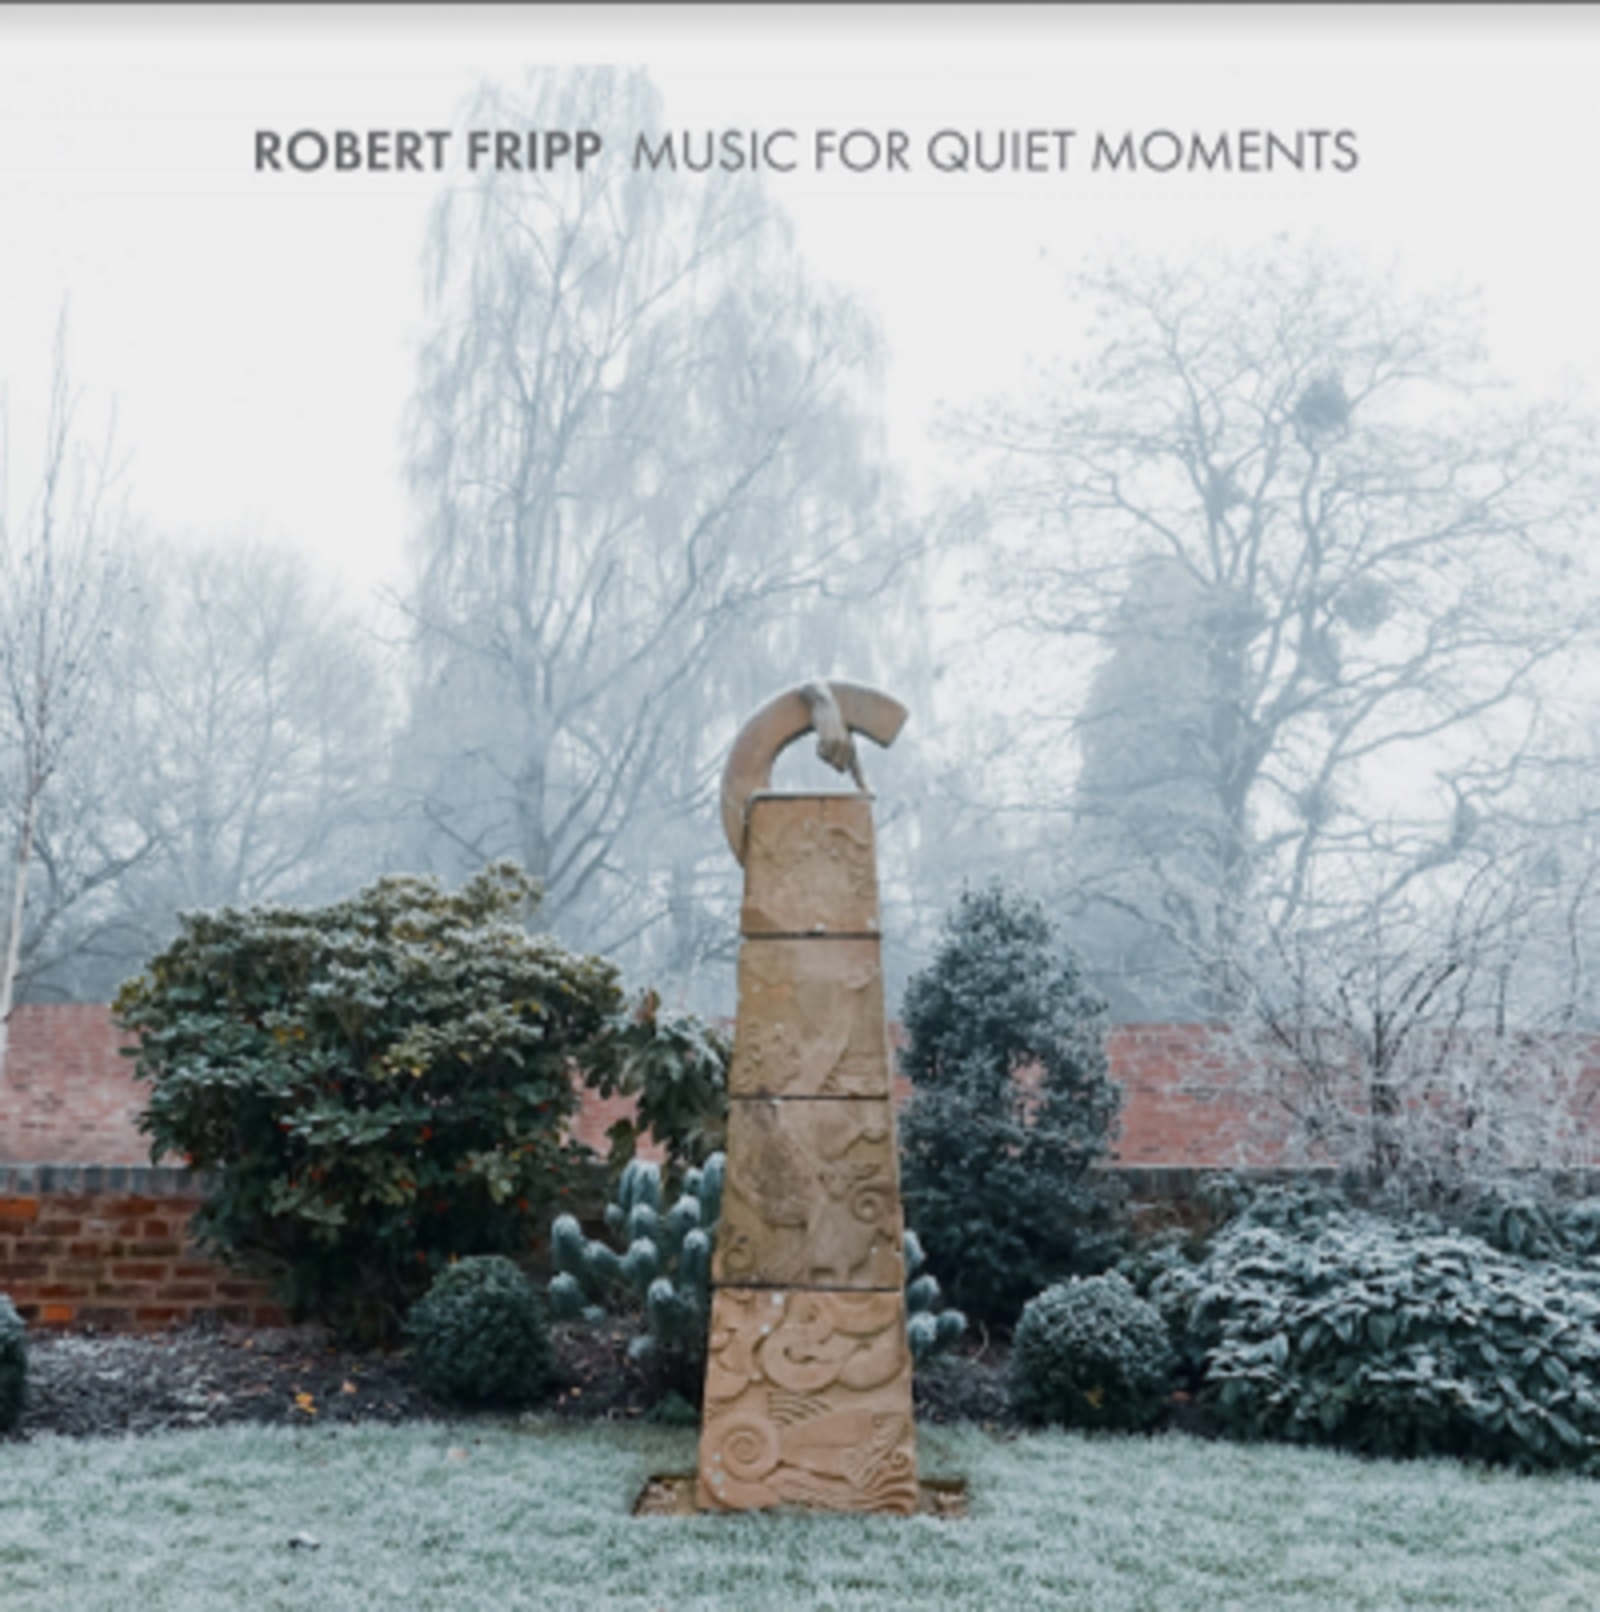 Robert Fripp’s “Music For Quiet Moments” Series 8CD Box Set Now Available For Pre-order